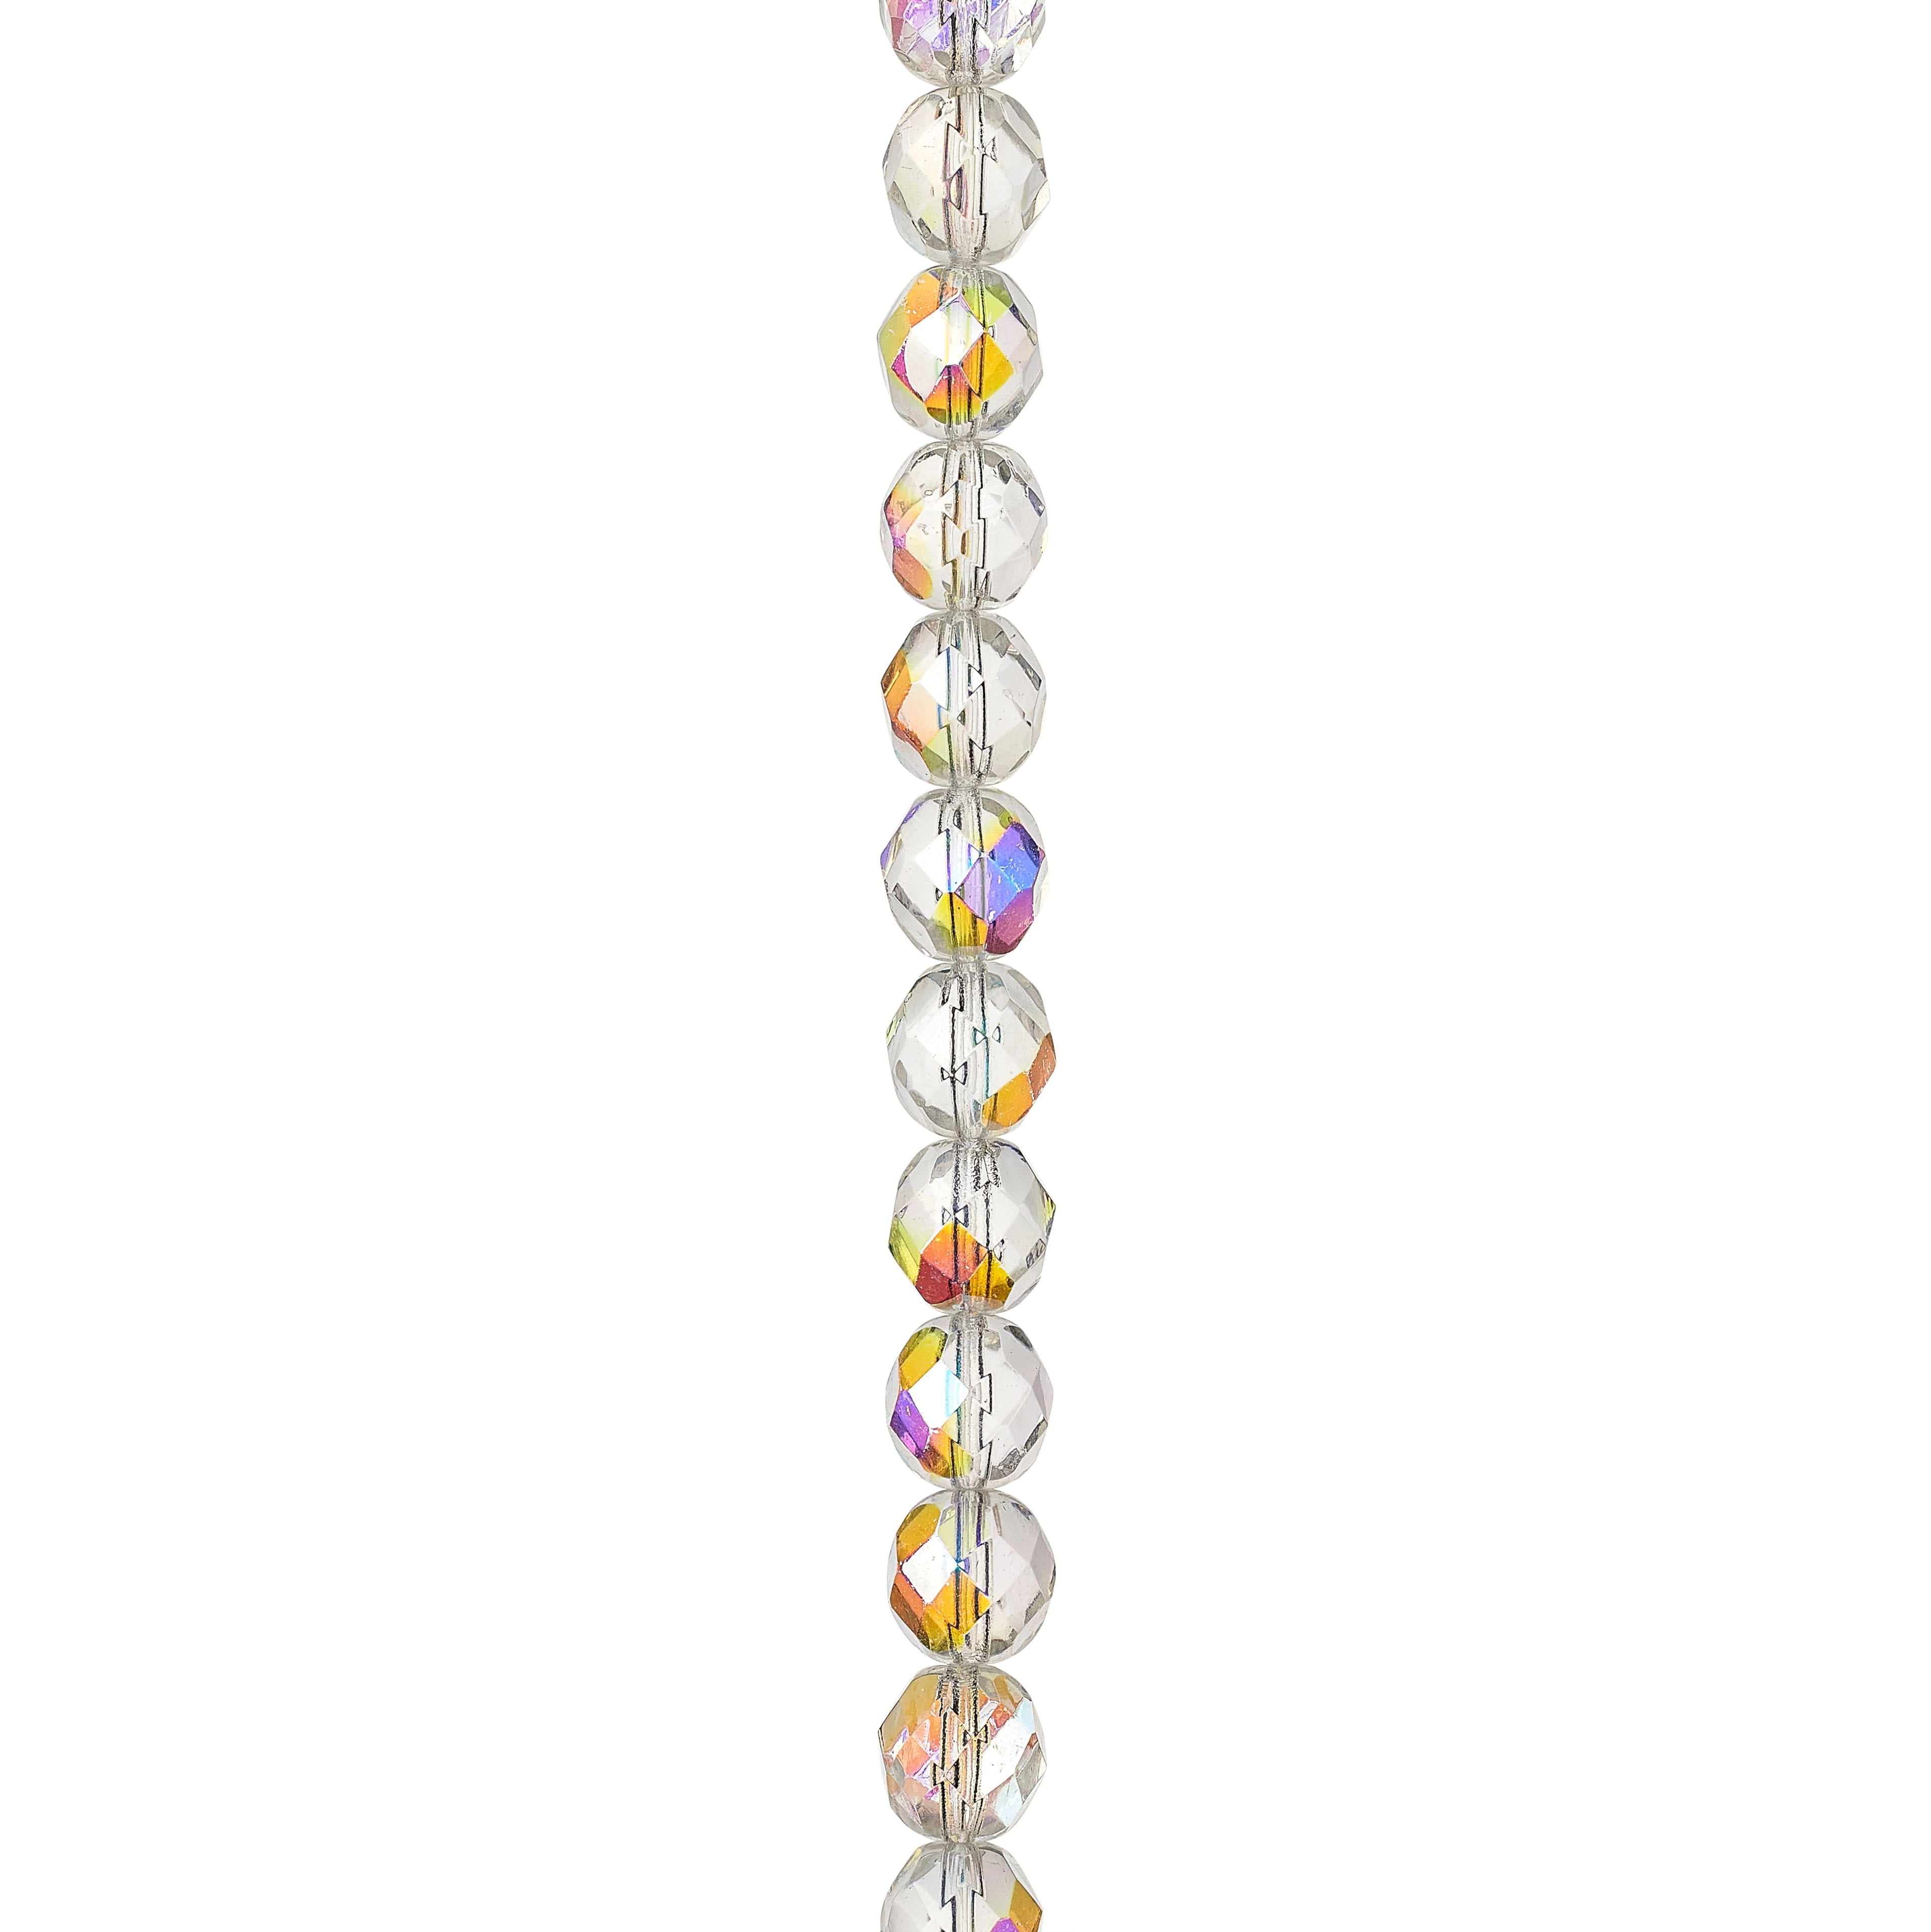 8mm x 8 mm Faceted Glass Bead Strand 8 in - Multi Colors - Trims By The Yard